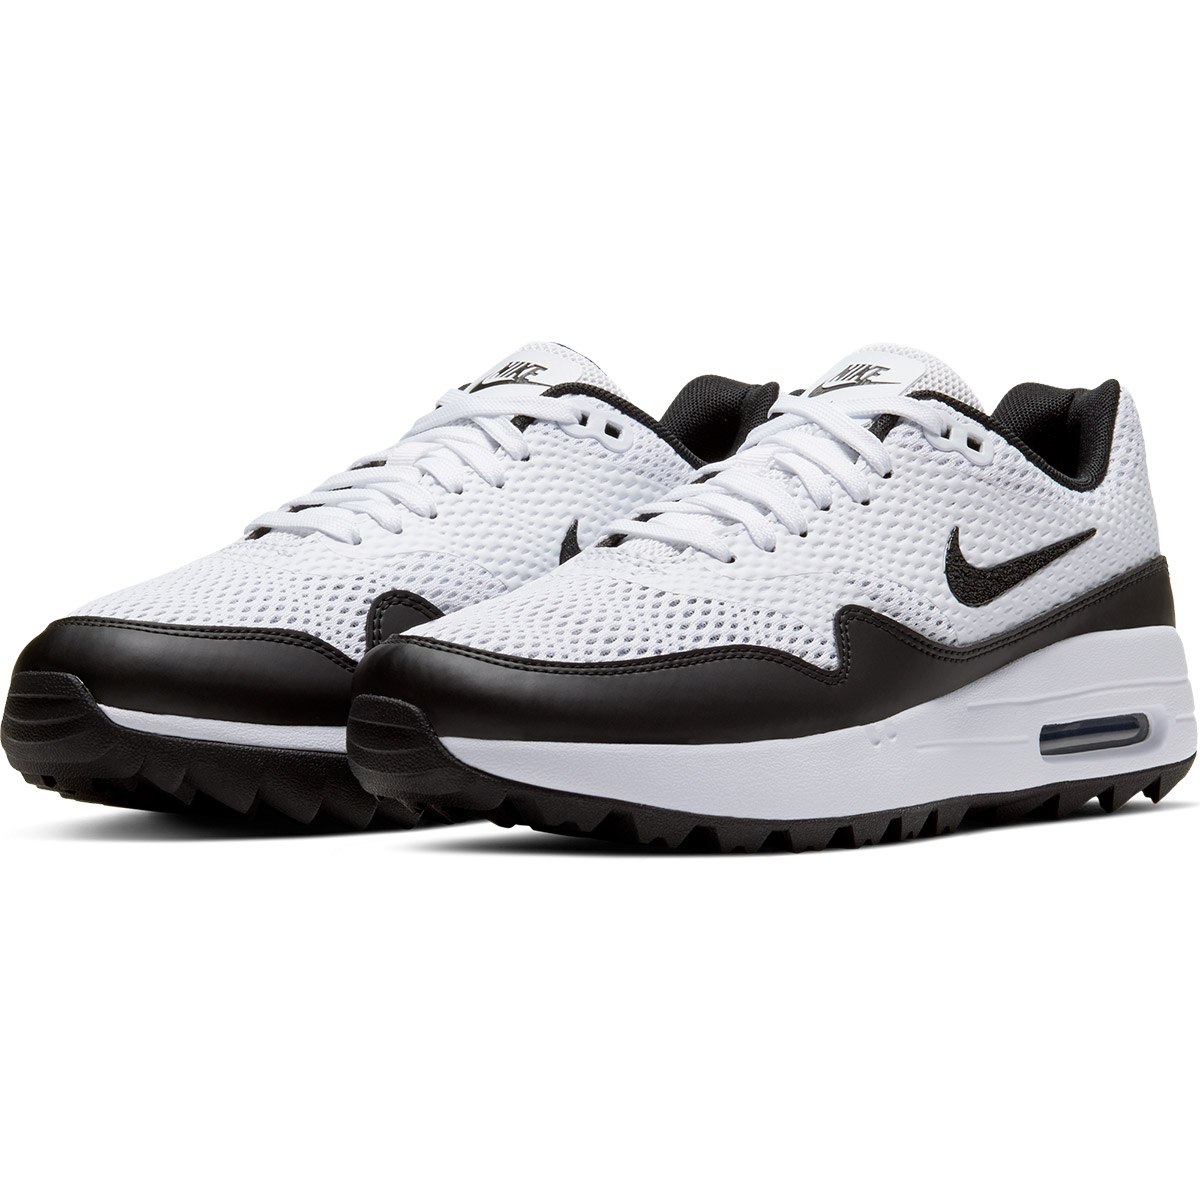 Nike Golf Air Max 1g Ladies Shoes 2020 From American Golf